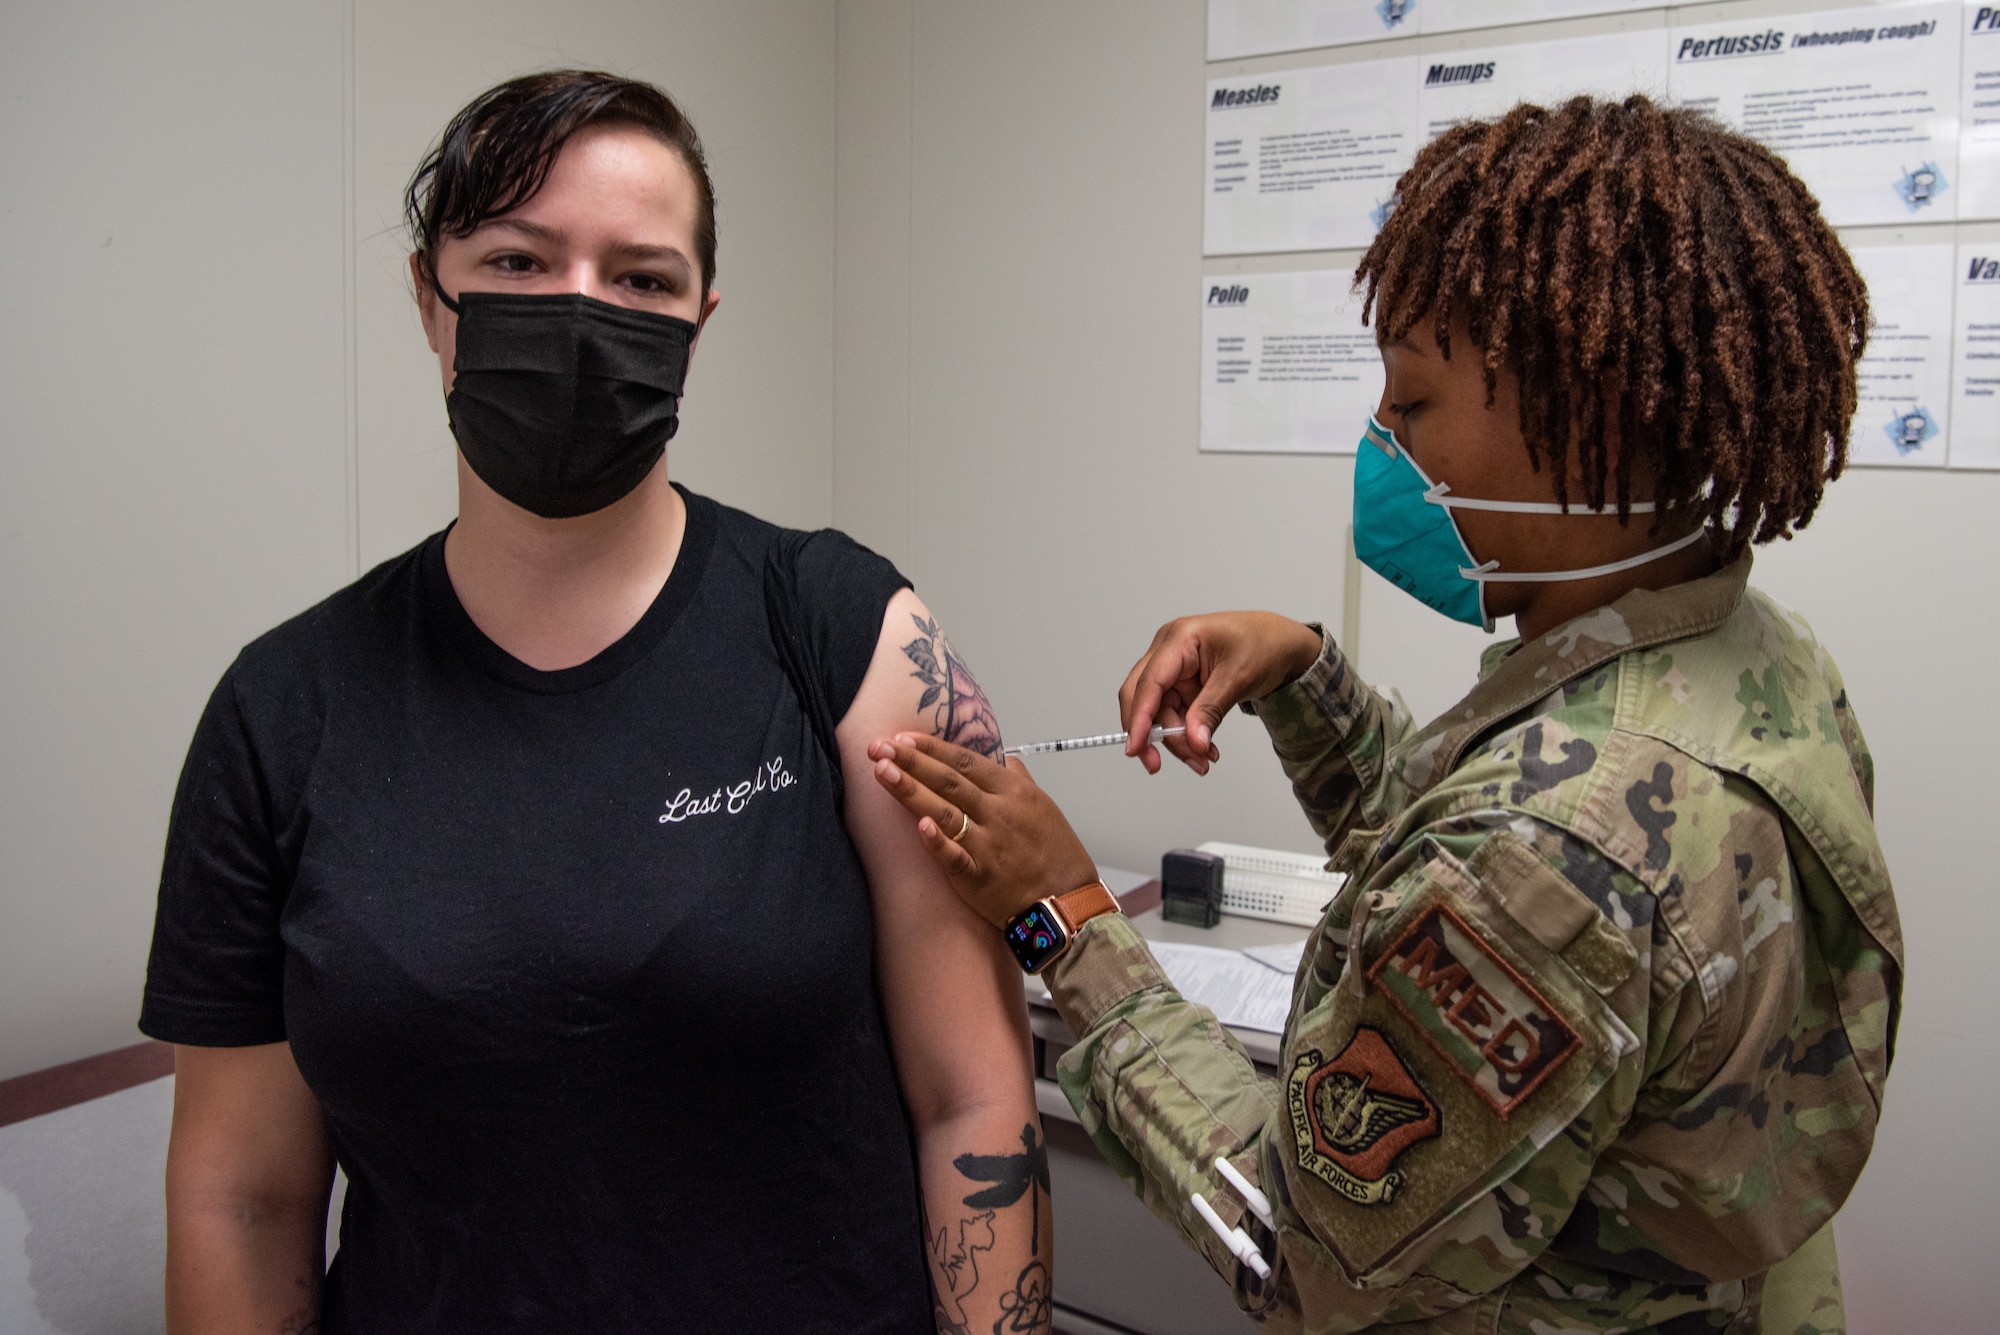 A medical technician administers a COVID-19 vaccine to a patient.